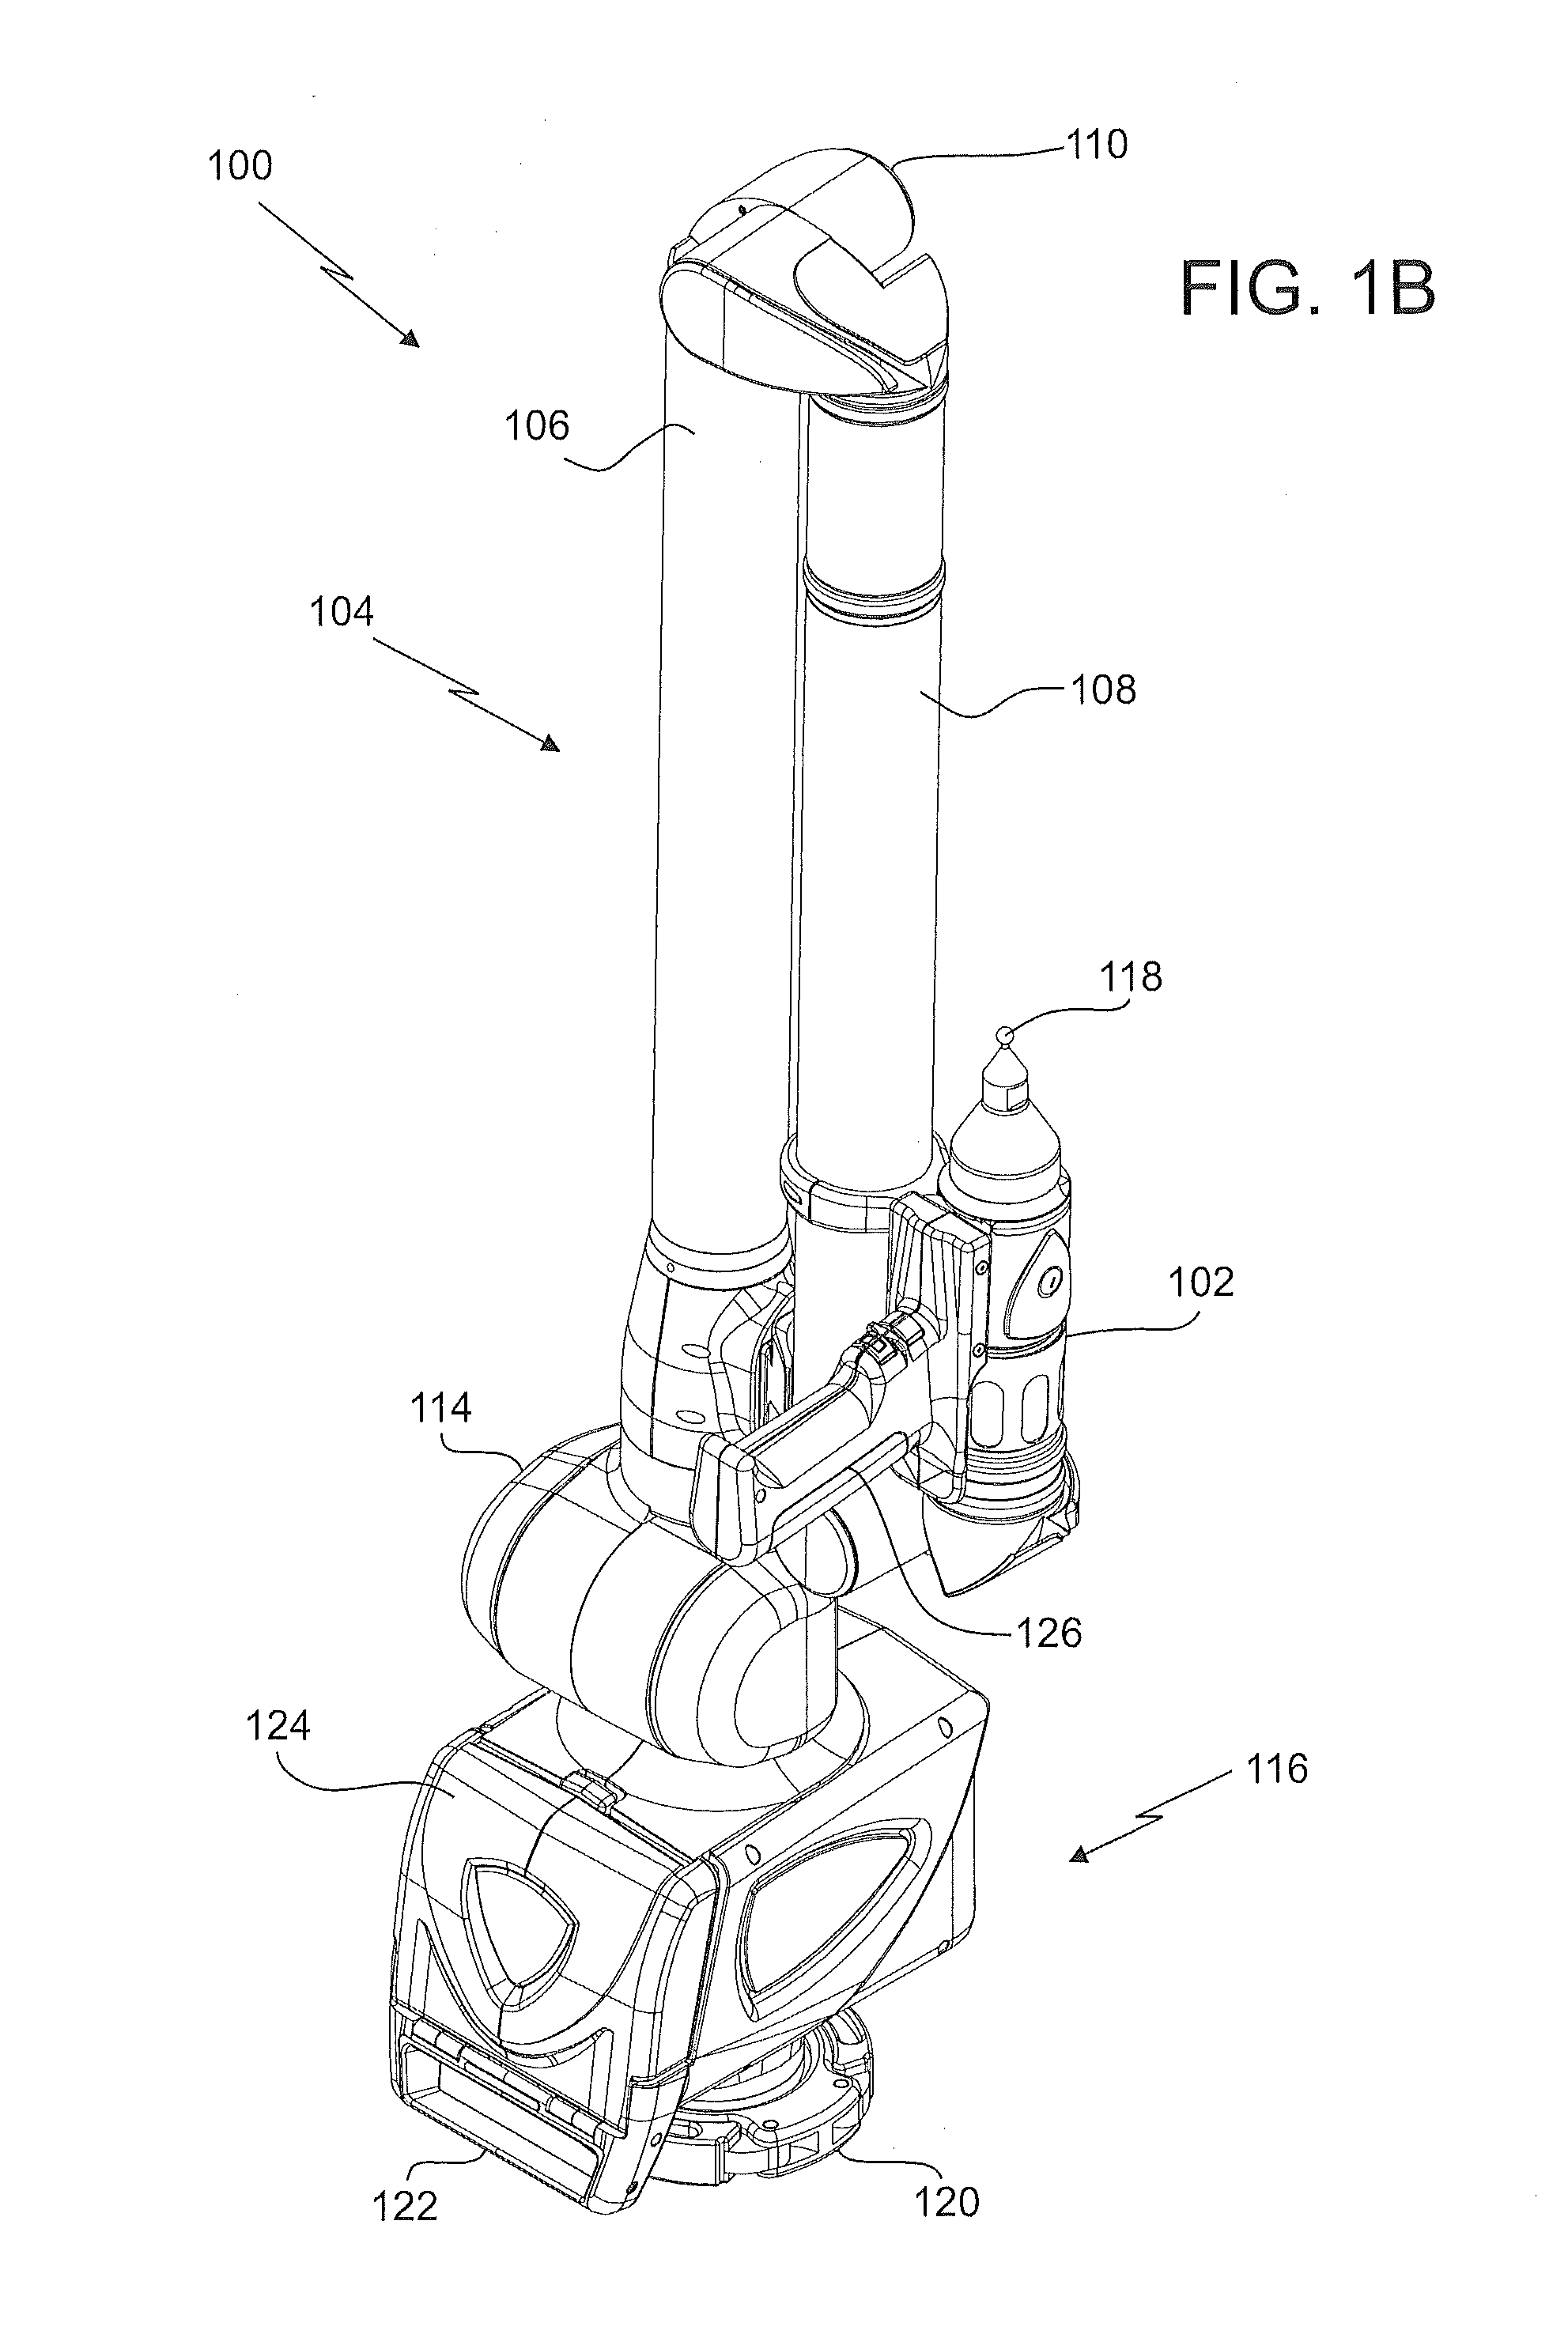 Method for measuring 3D coordinates of a surface with a portable articulated arm coordinate measuring machine having a camera